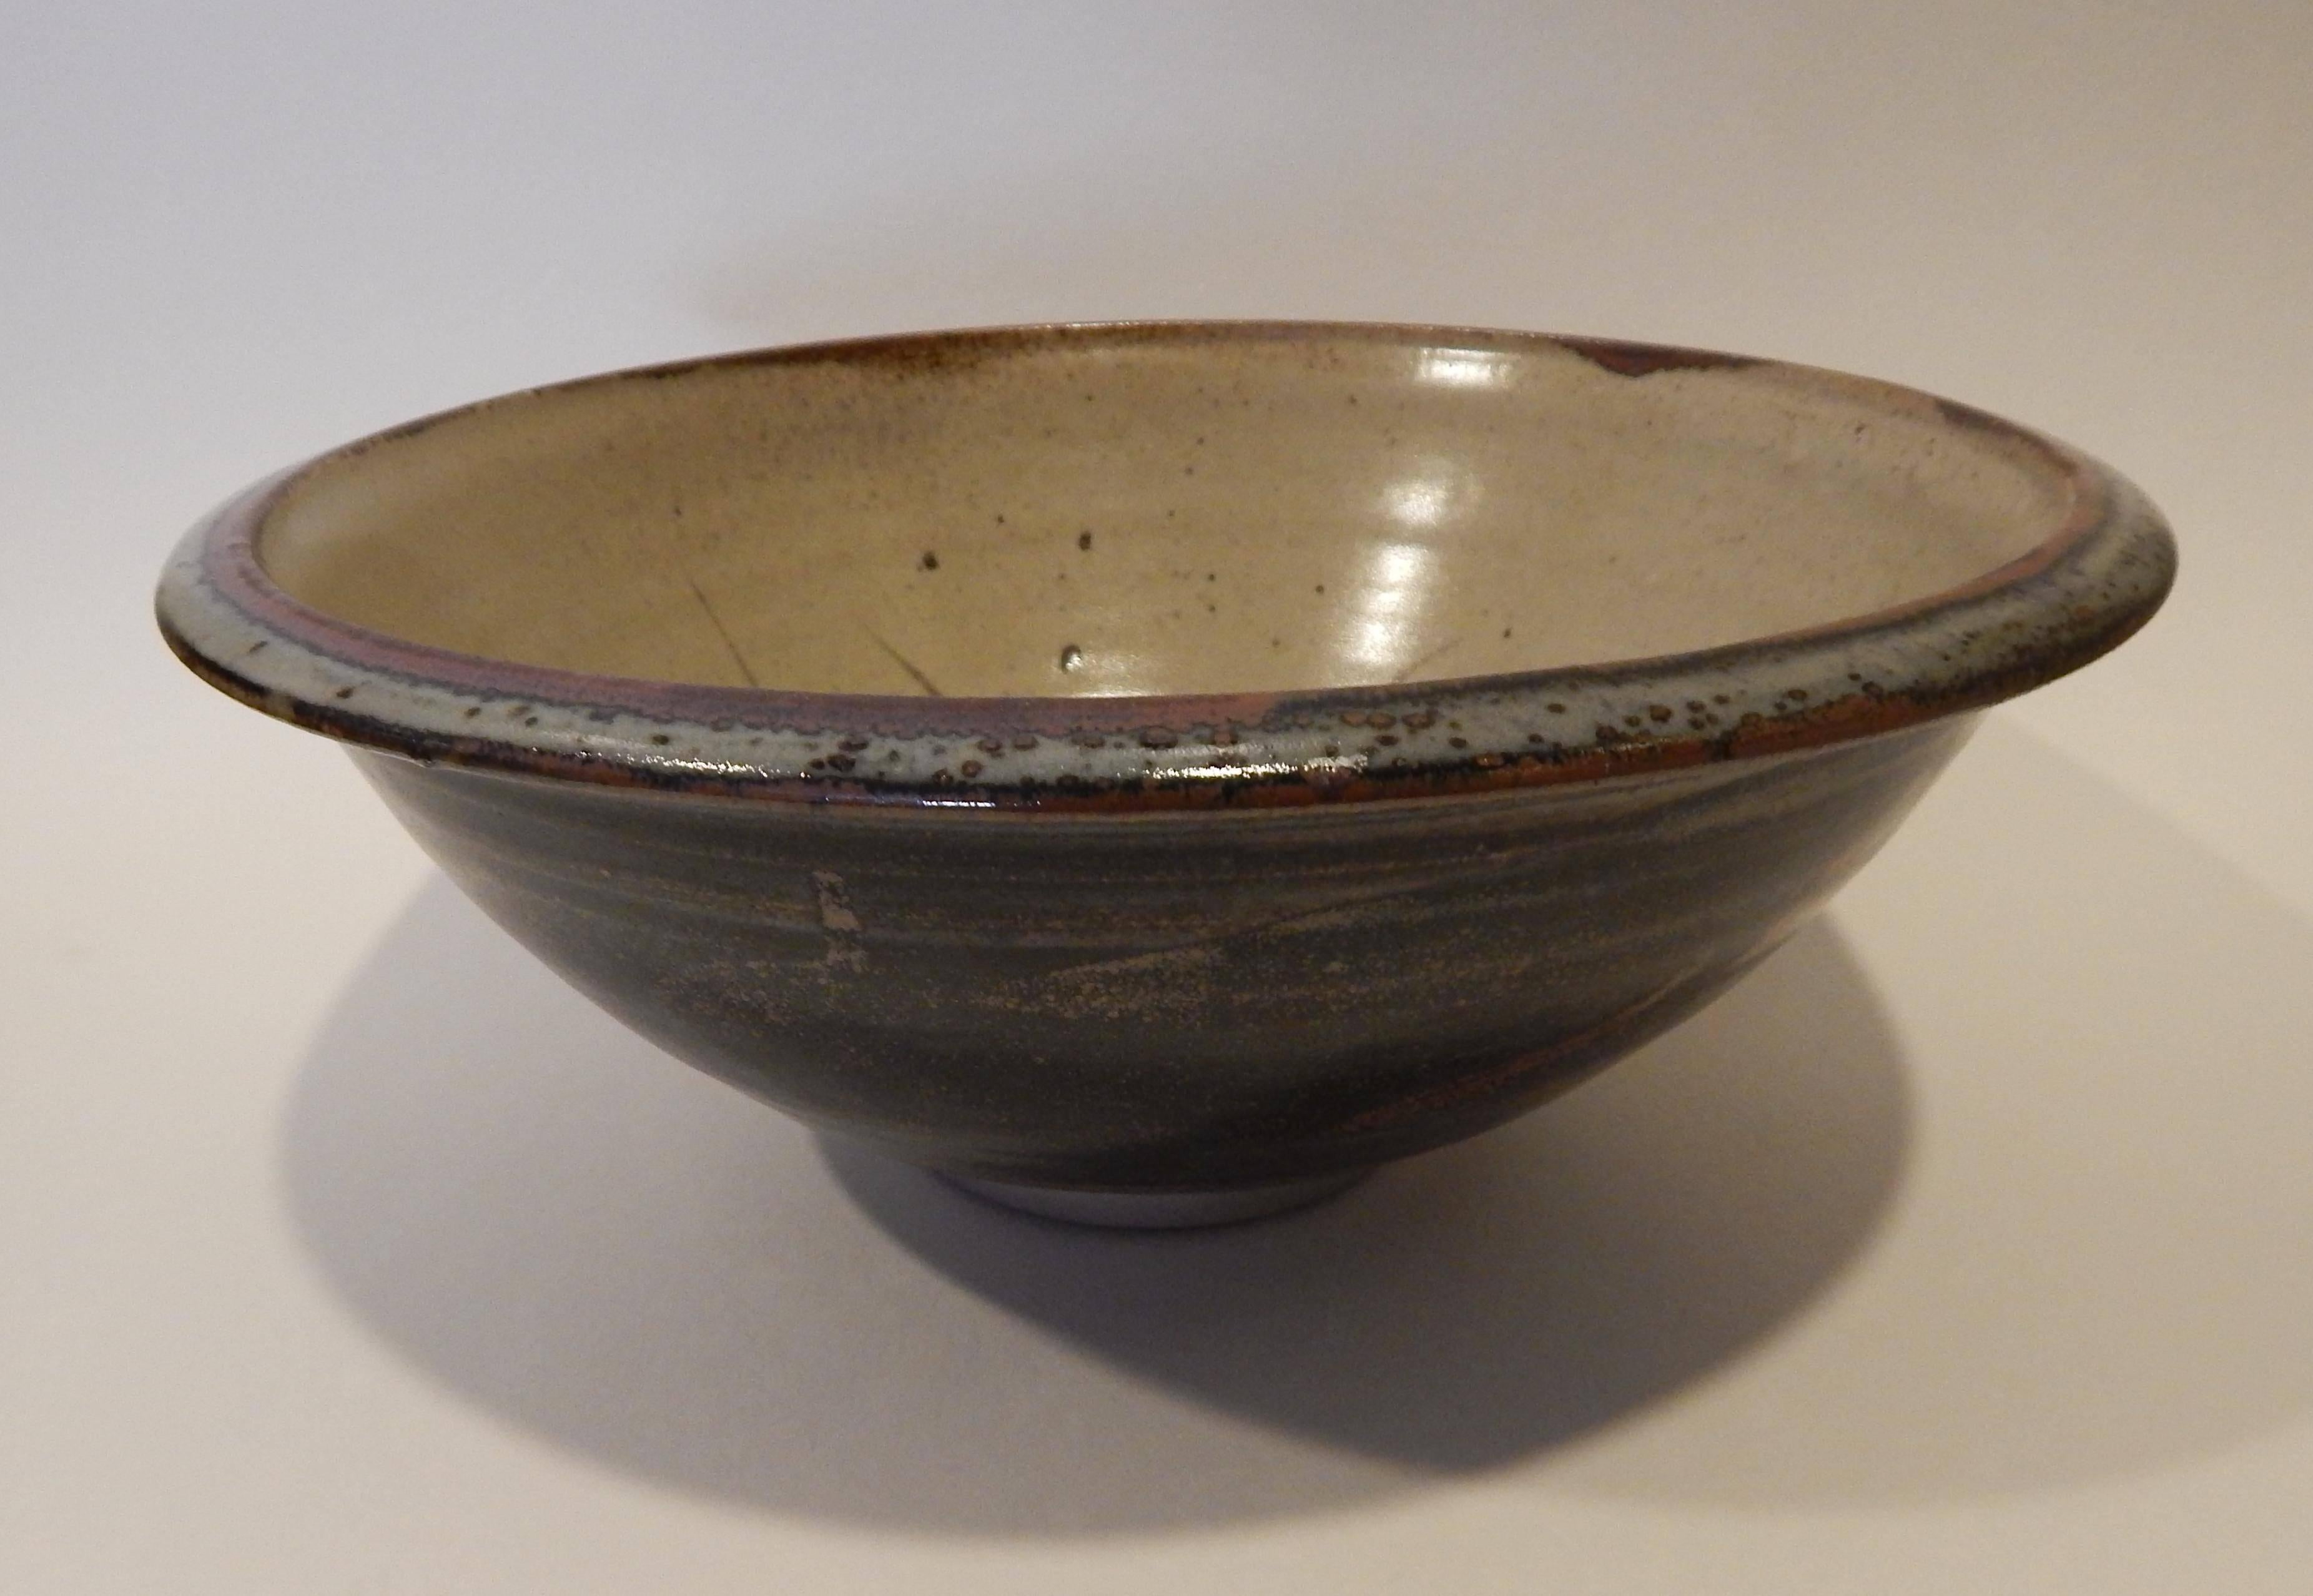 This ceramic bowl was created at the St. Ives Pottery
founded by Bernard Leech.
Measures: 5